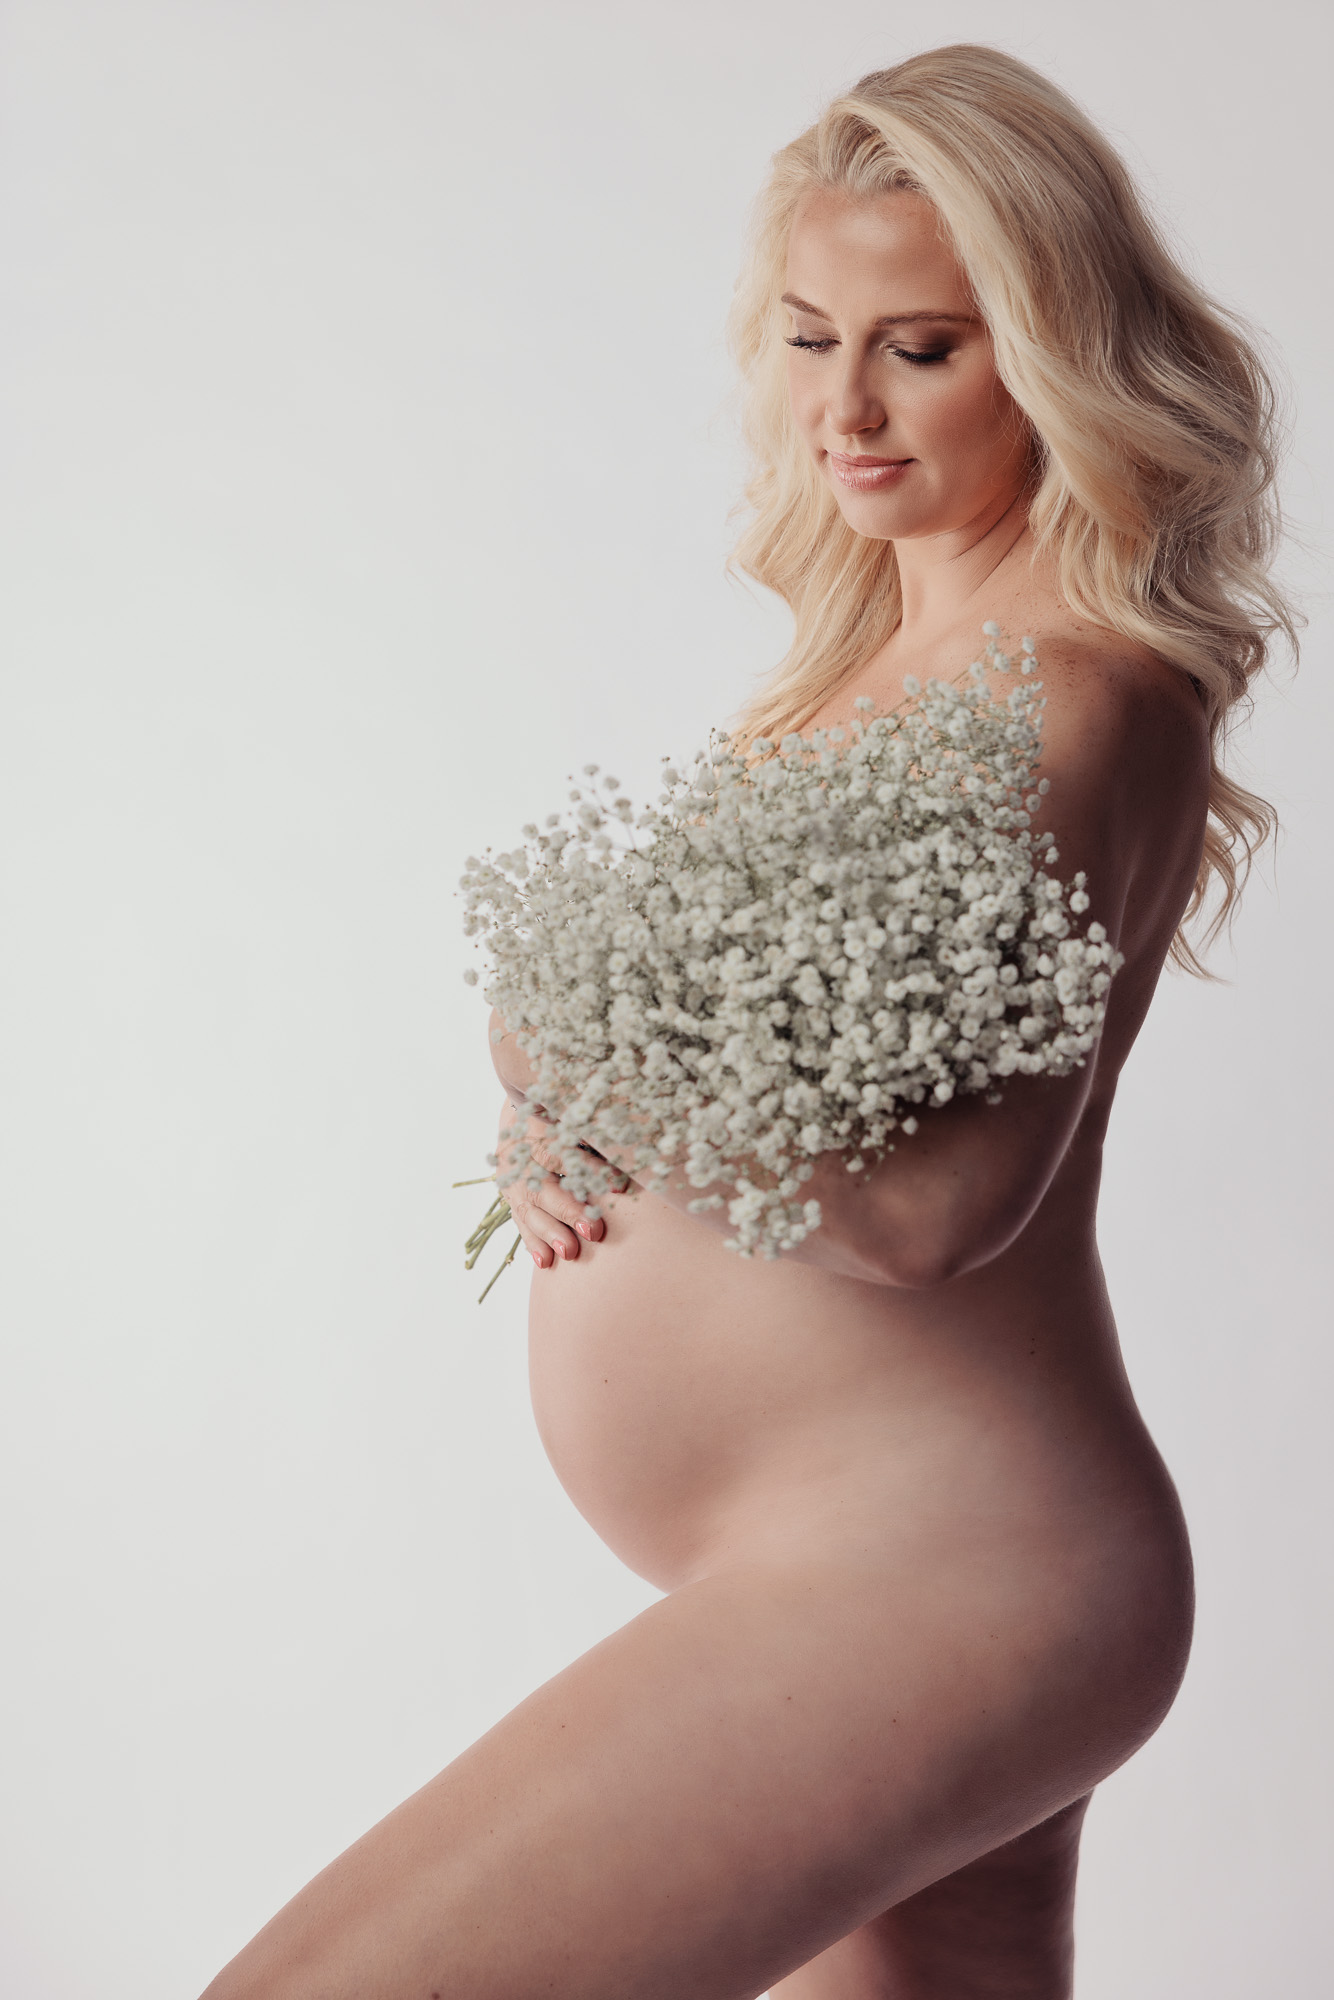 maternity photo of woman holding baby's breath flowers in studio